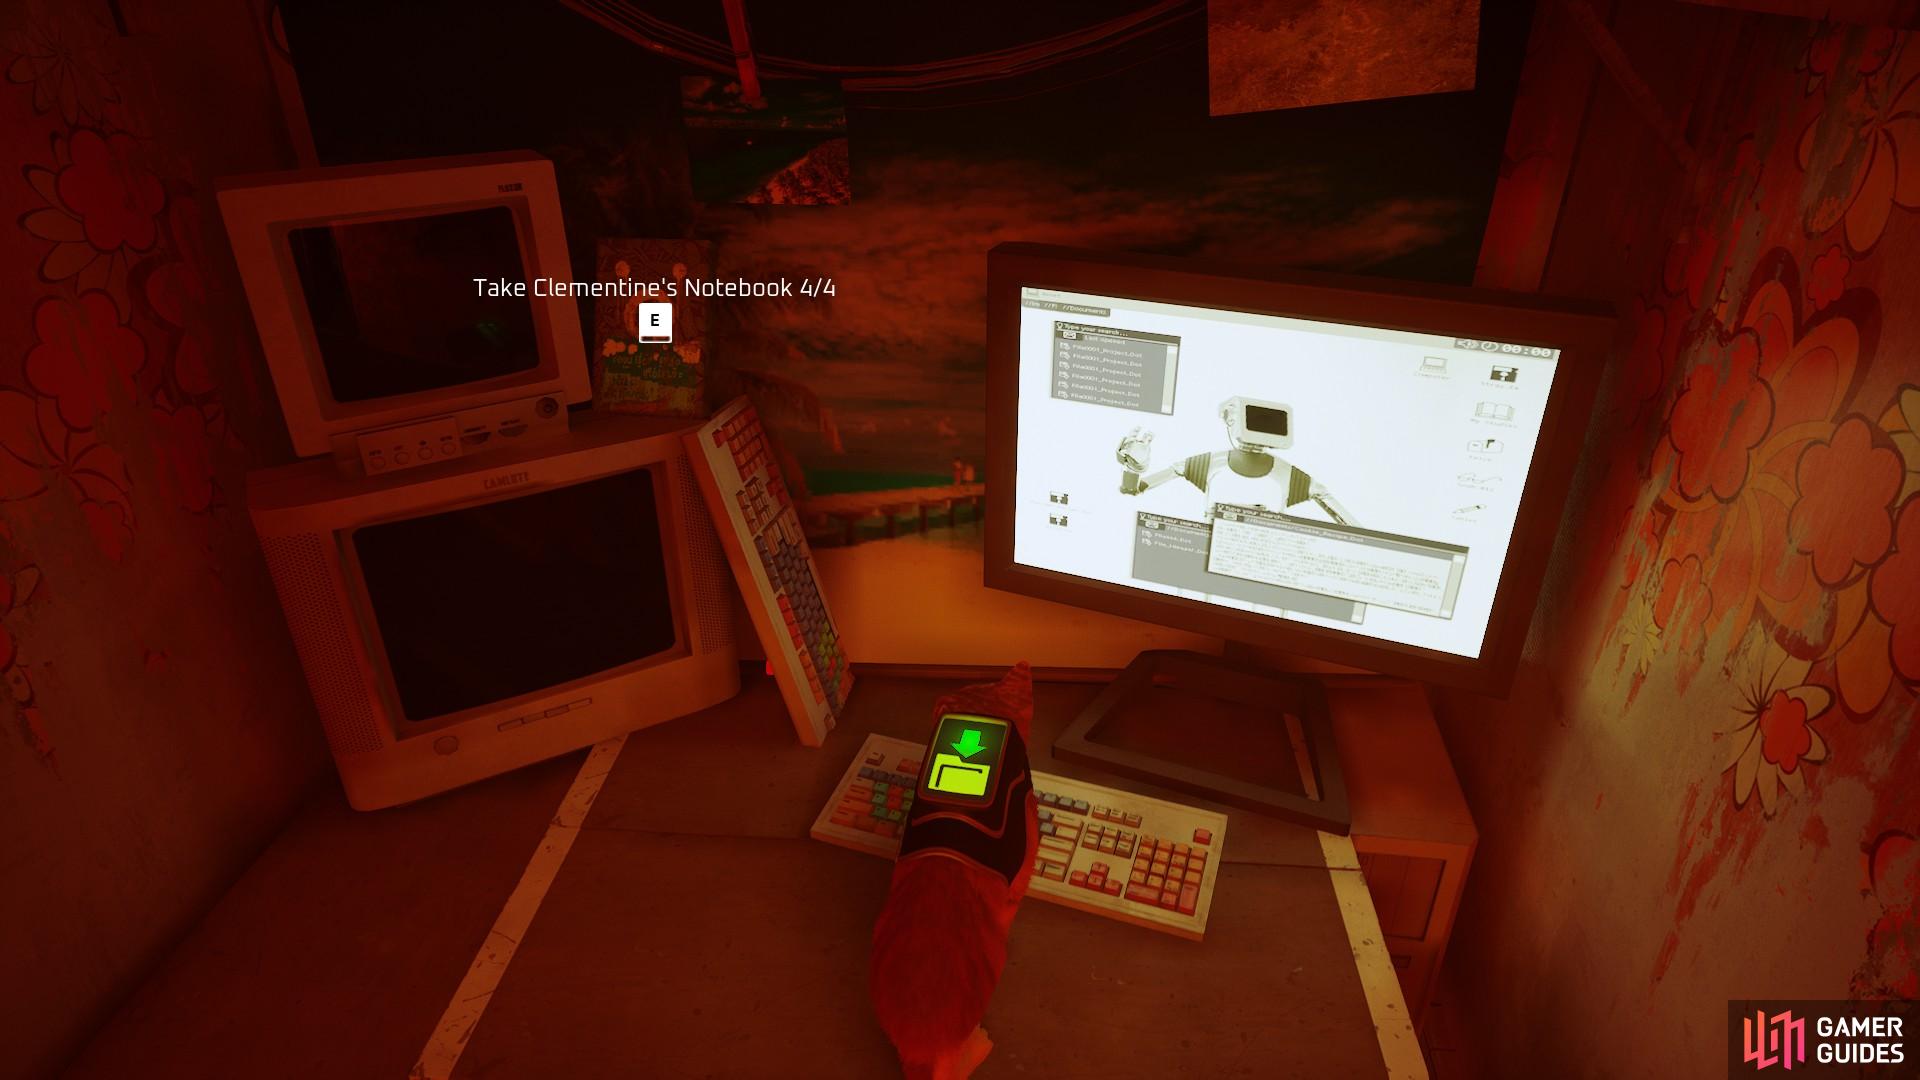 The Clementine notebook location is on the computer desk.